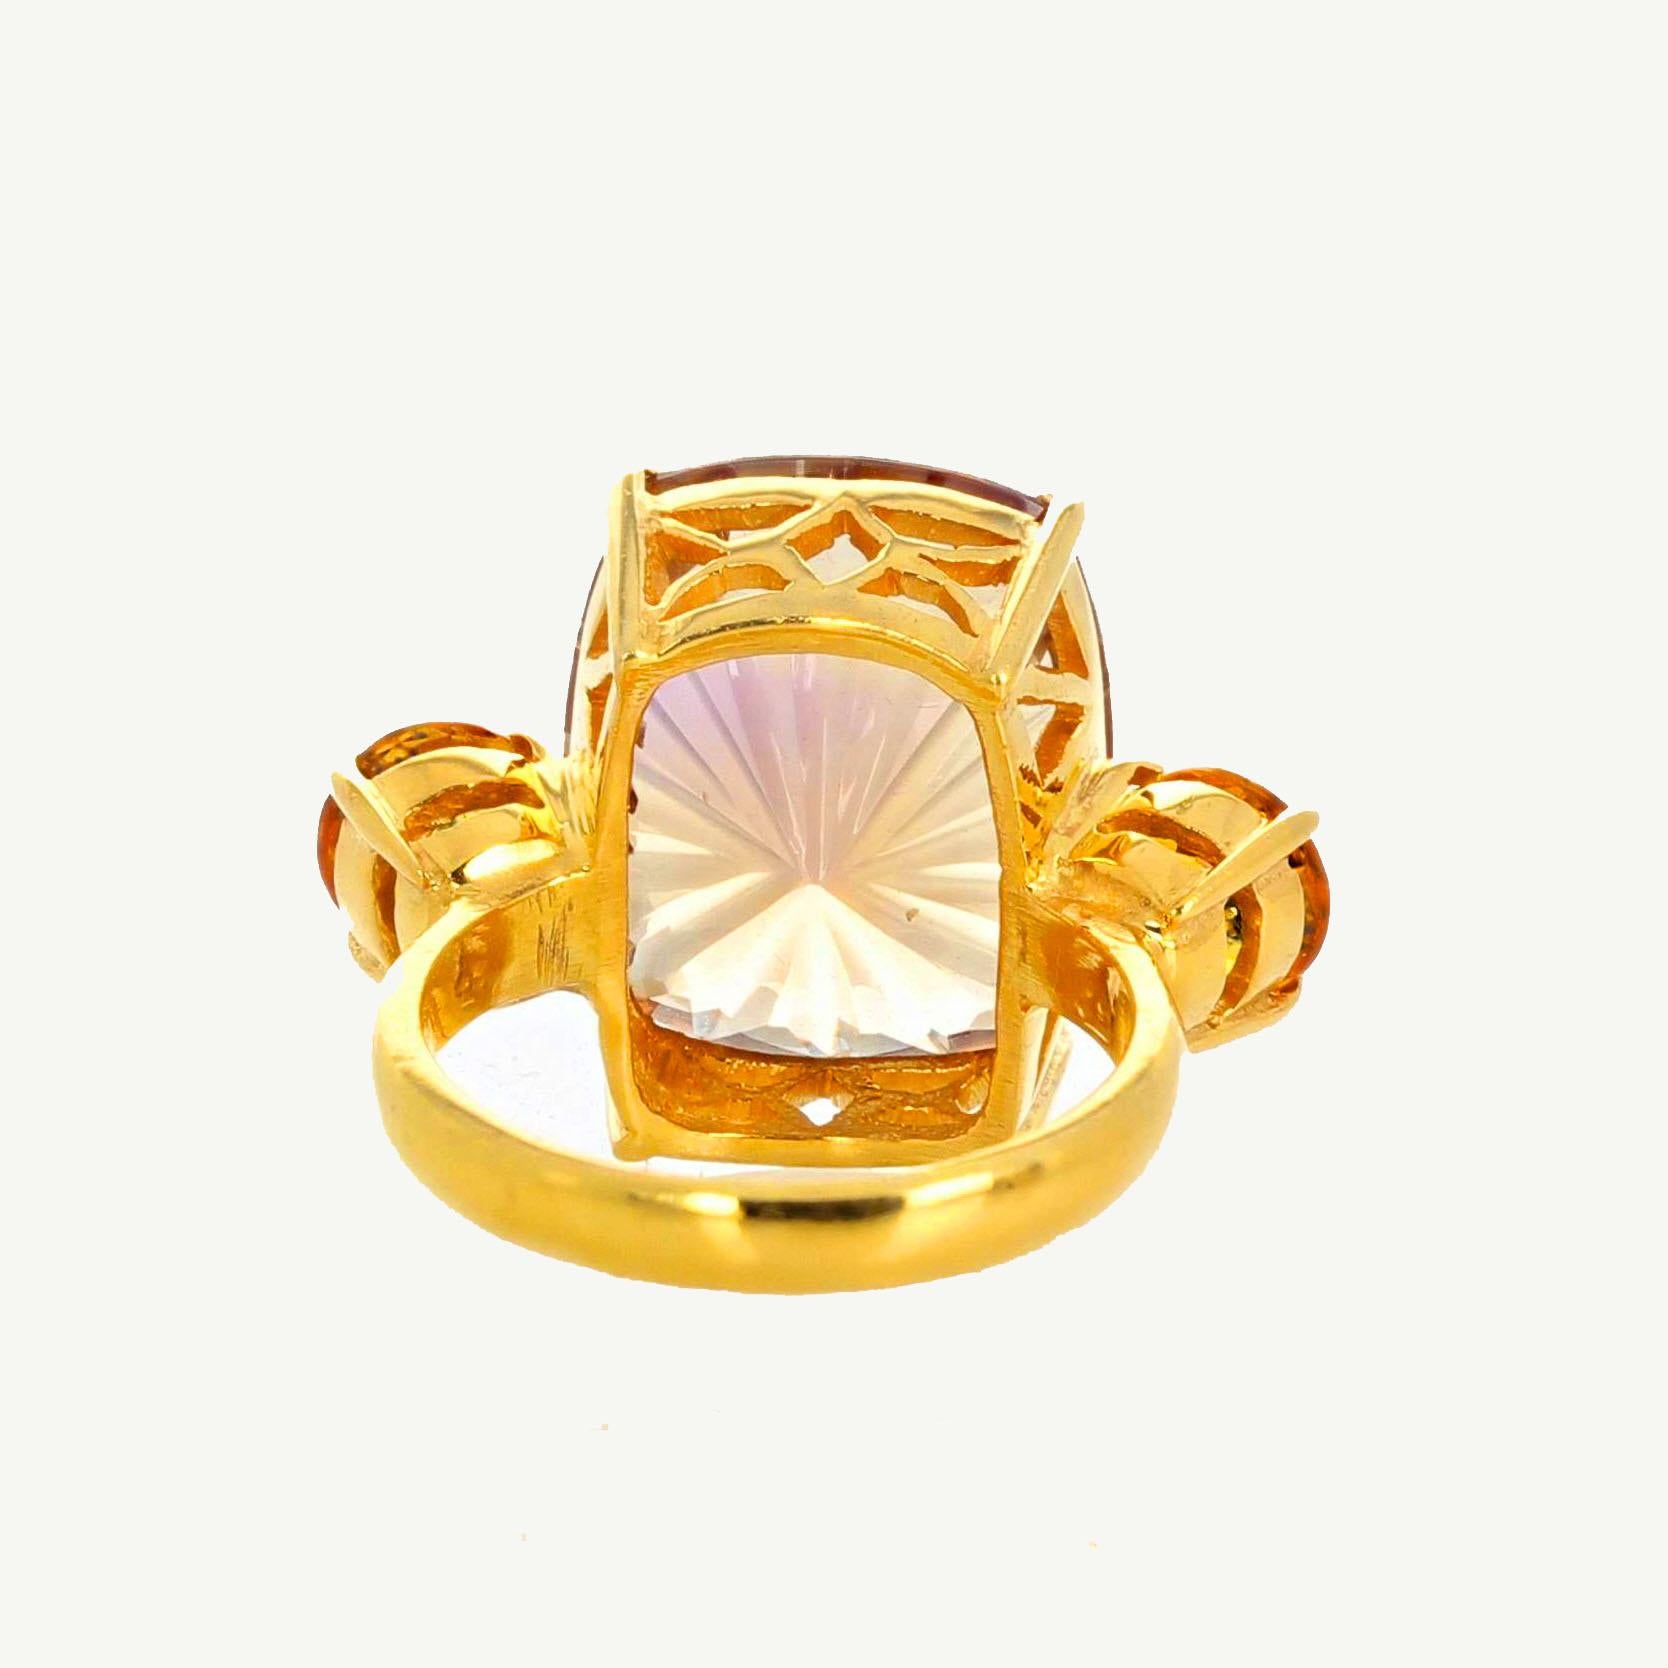 Cushion Cut AJD Absolutely Huge Dazzling 12.02 Ct Blush Gold Citrine & Sapphire Ring